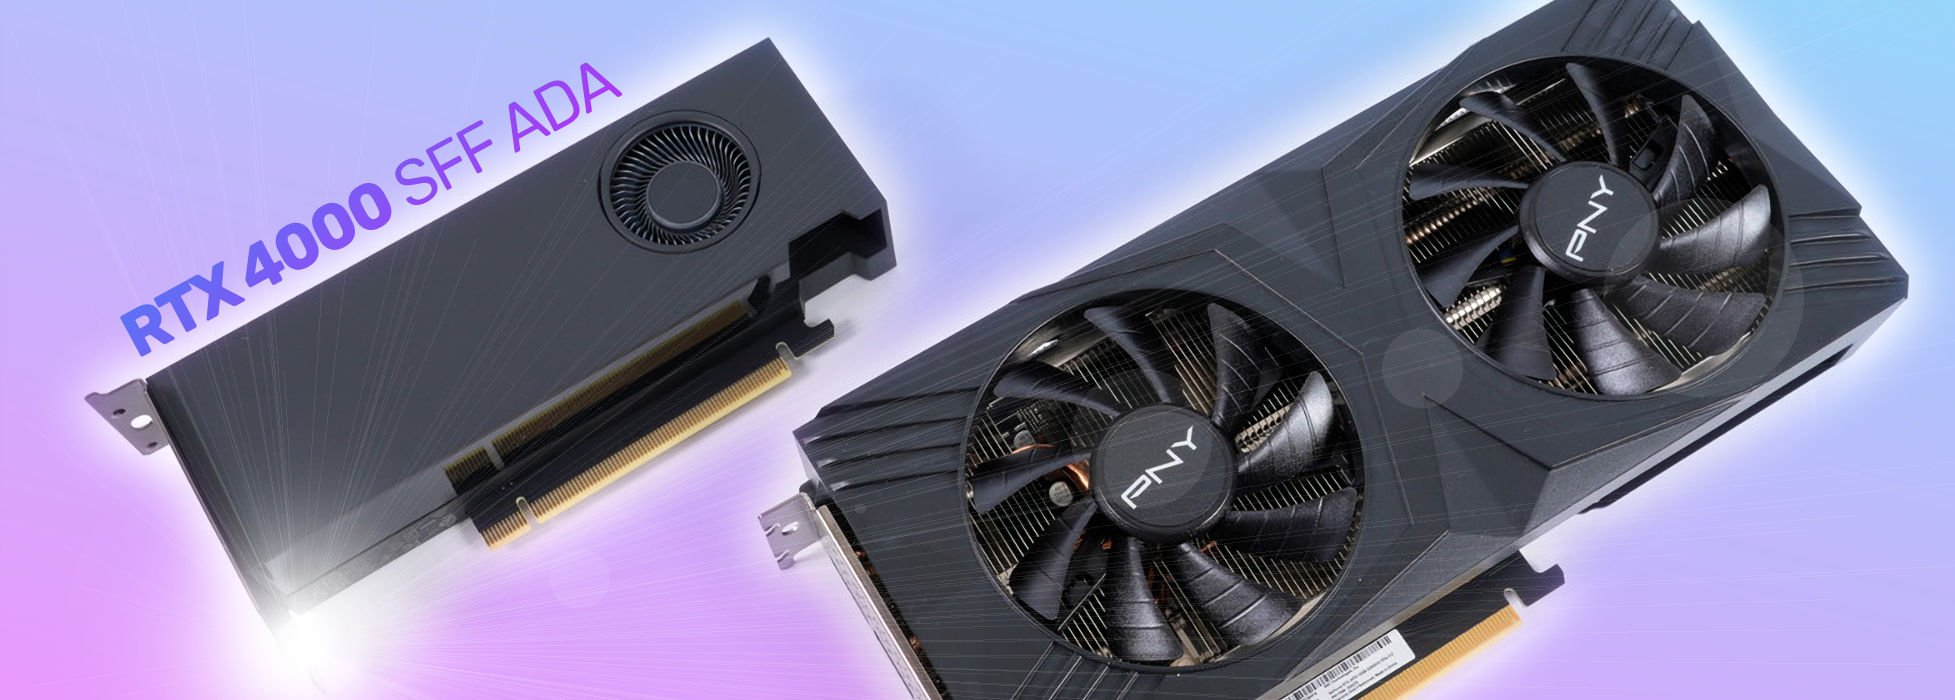 NVIDIA RTX A2000 GPU Launched for Mainstream Professional Graphics